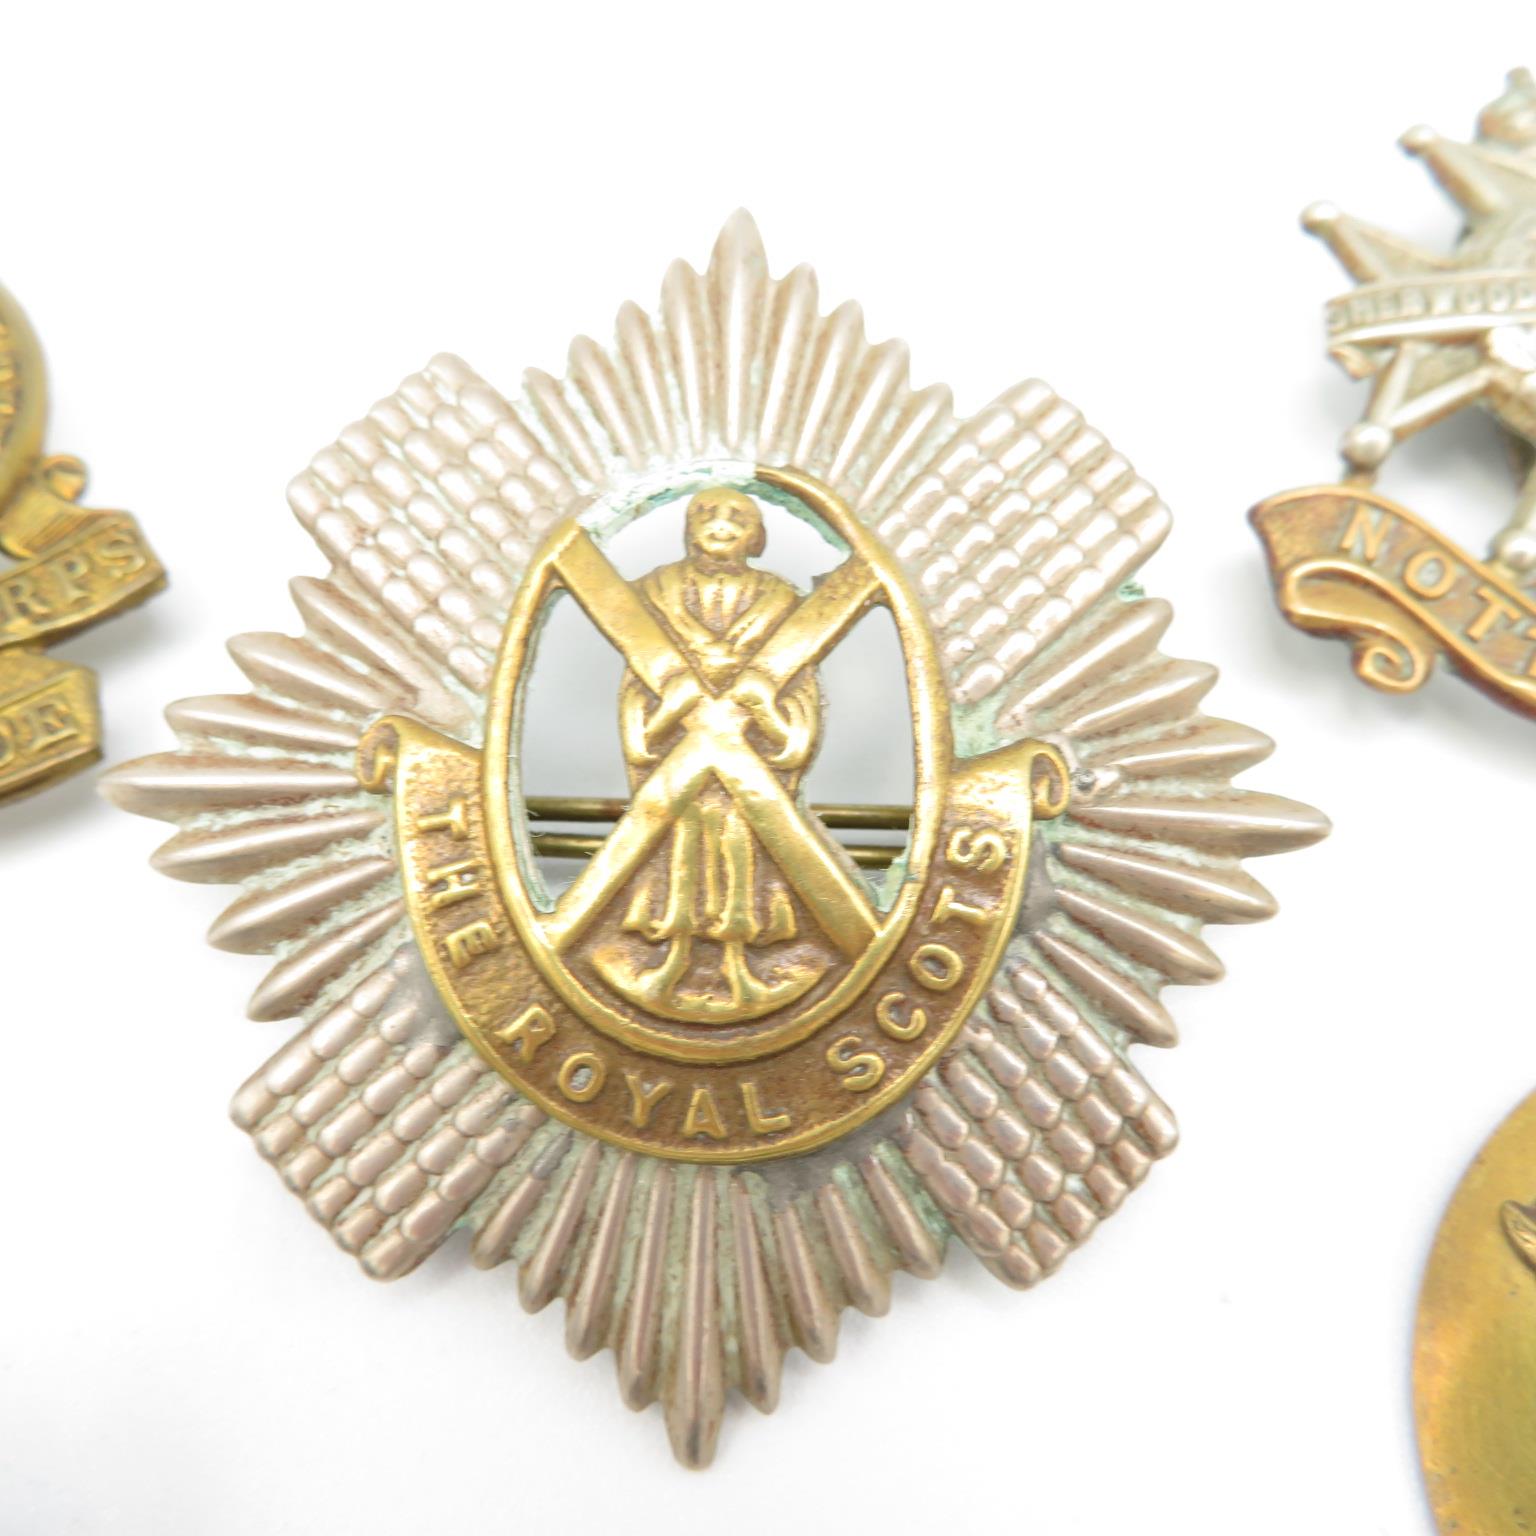 15x Military cap badges including Royal Scots Army Air Corps etc. - - Image 3 of 16